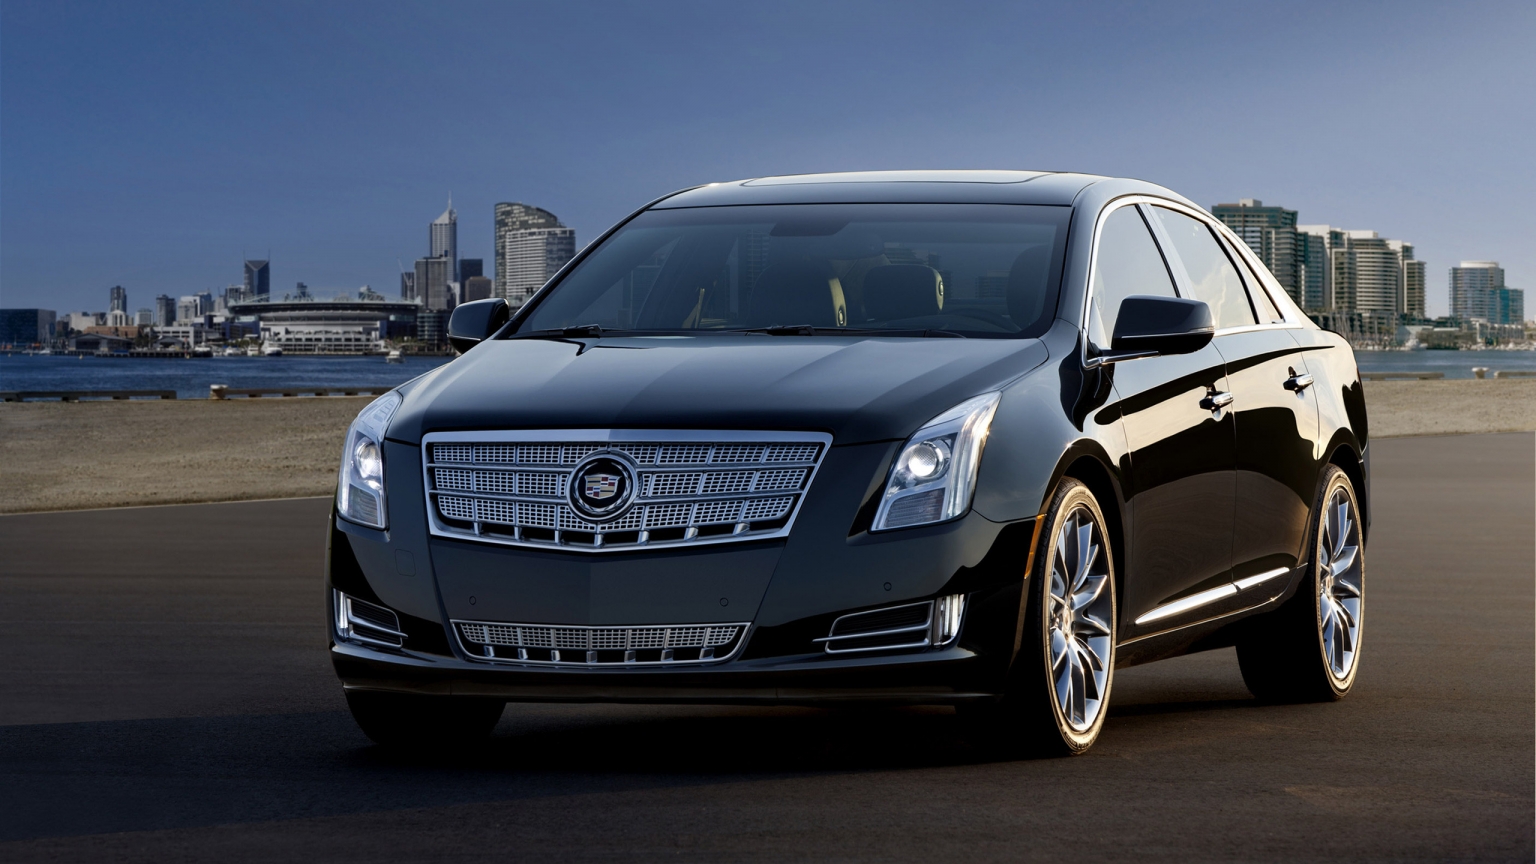 Cadillac XTS 2013 Edition for 1536 x 864 HDTV resolution